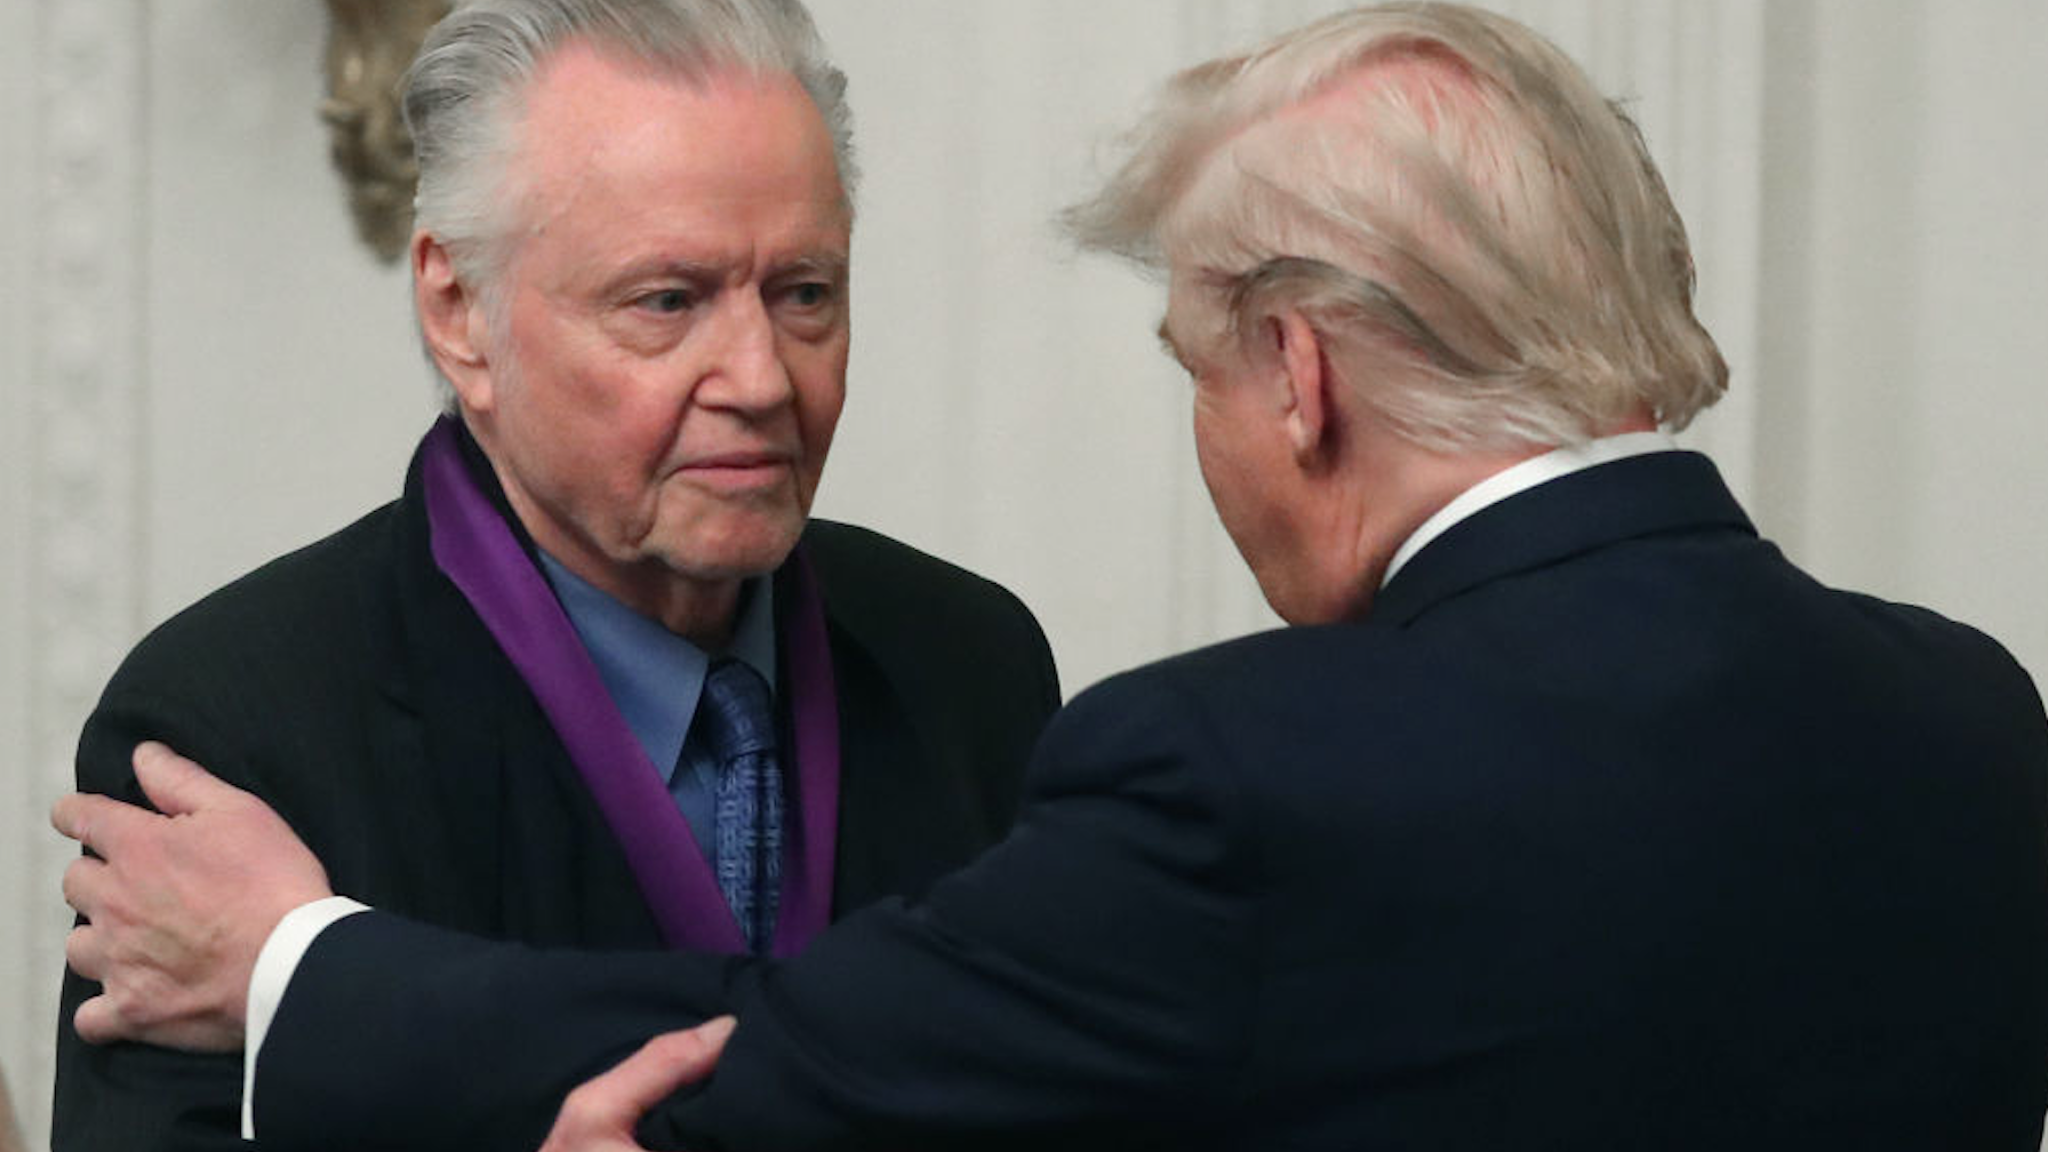 U.S. President Donald Trump (R) presents actor Jon Voight with the National Medal of Arts during a ceremony in the East Room of the Whit House on November 21, 2019 in Washington, DC.